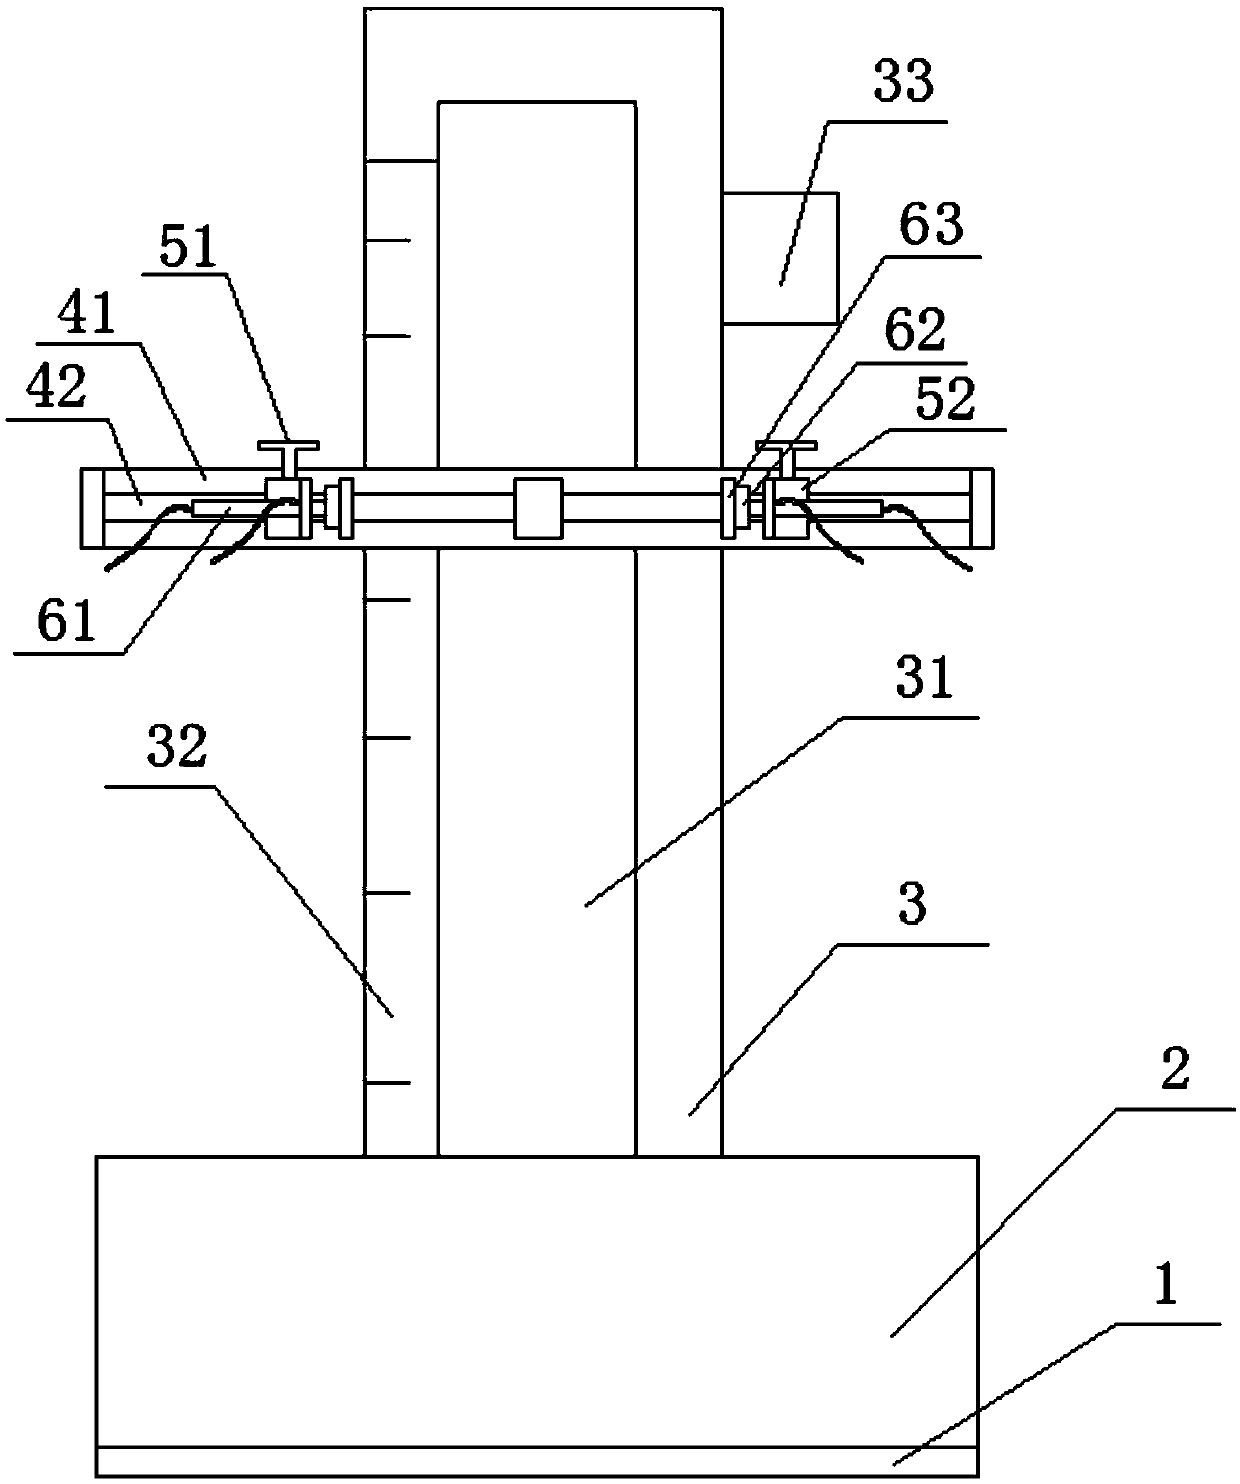 Inspection device for inspecting mobile phone screen and casing